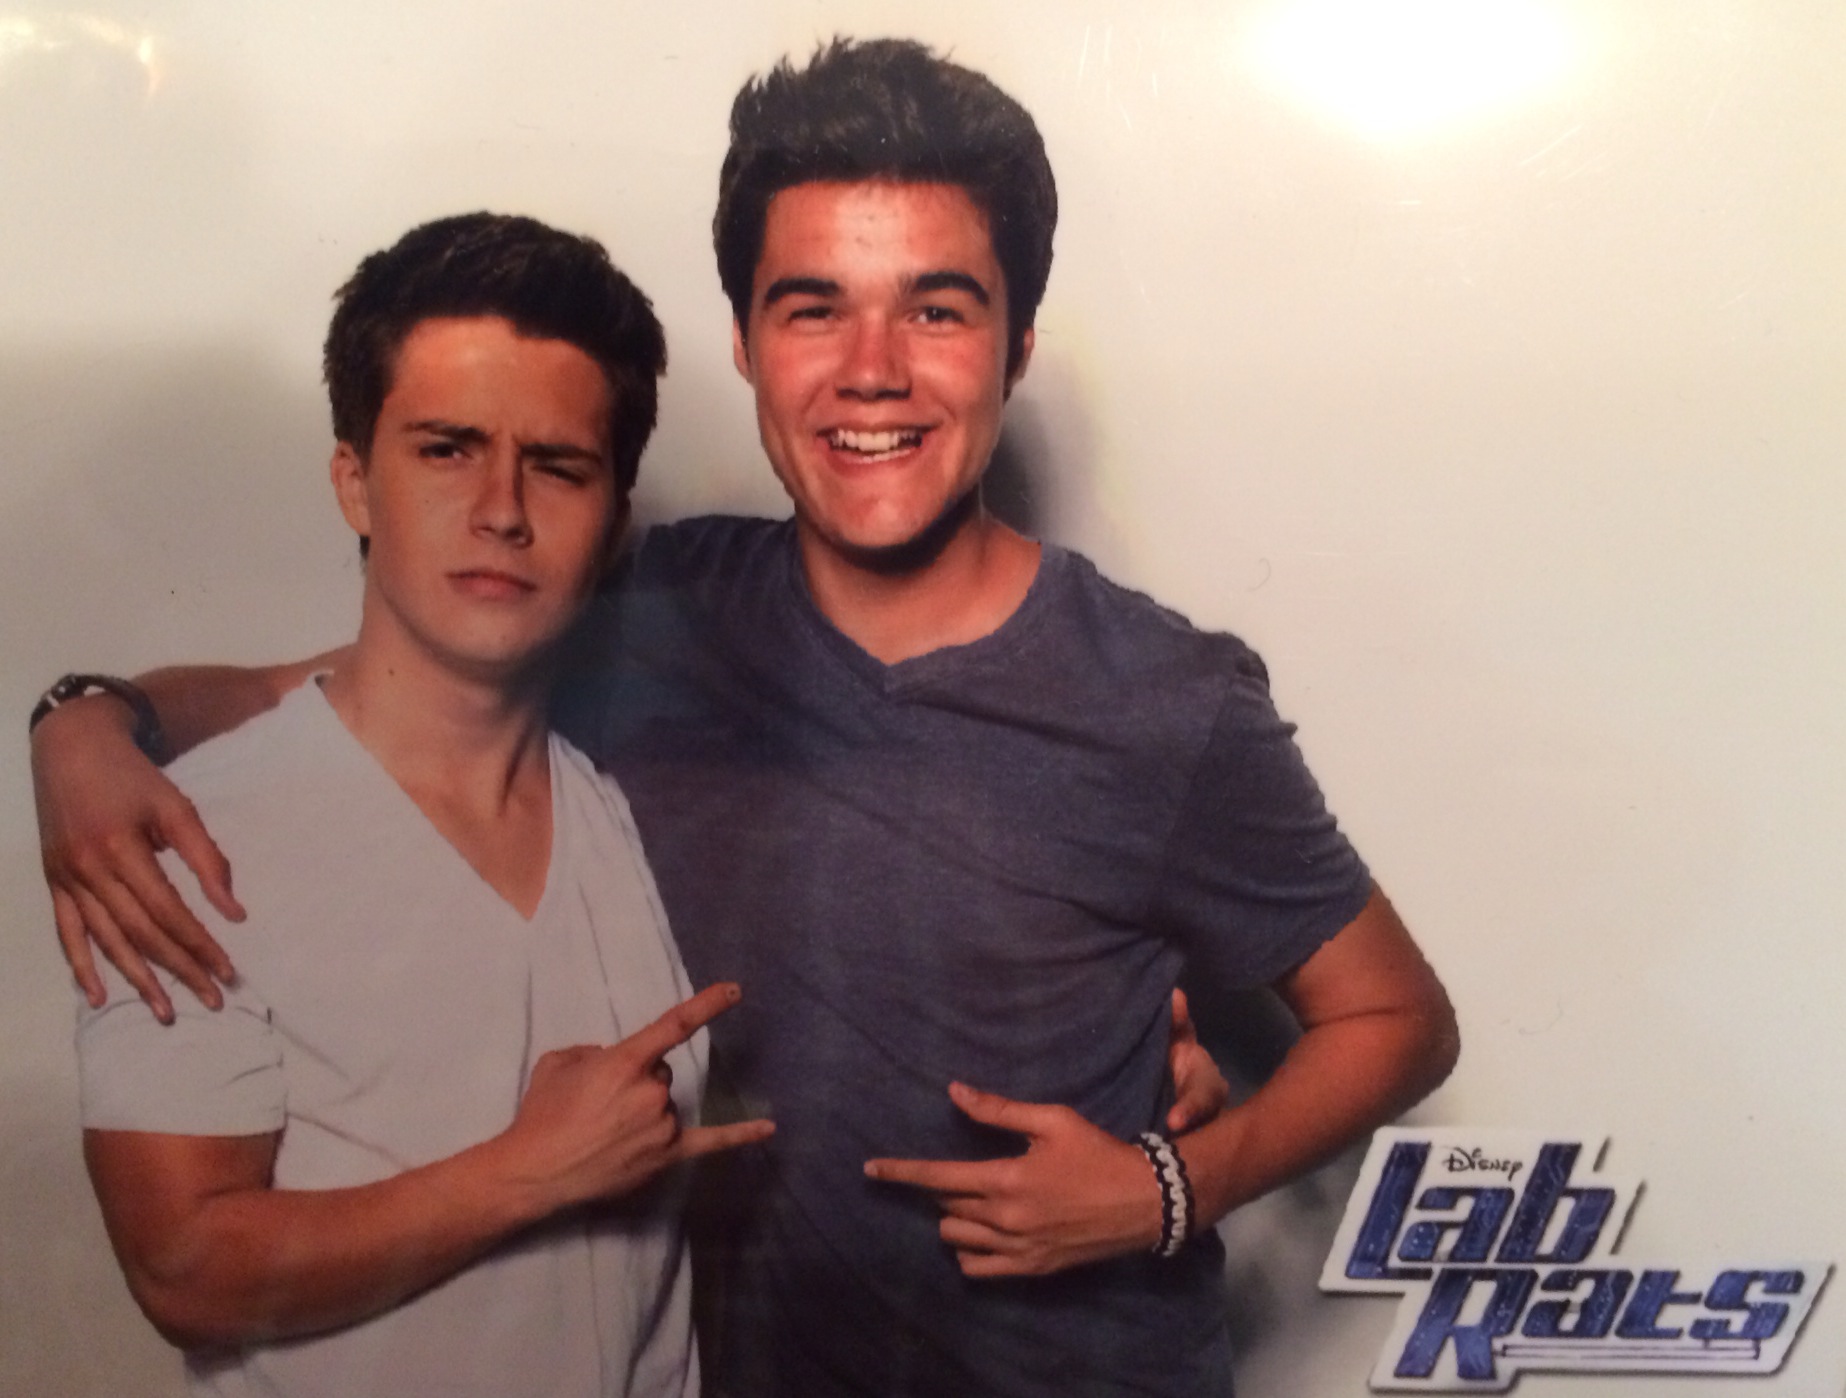 Billy Unger and Cole Ewing